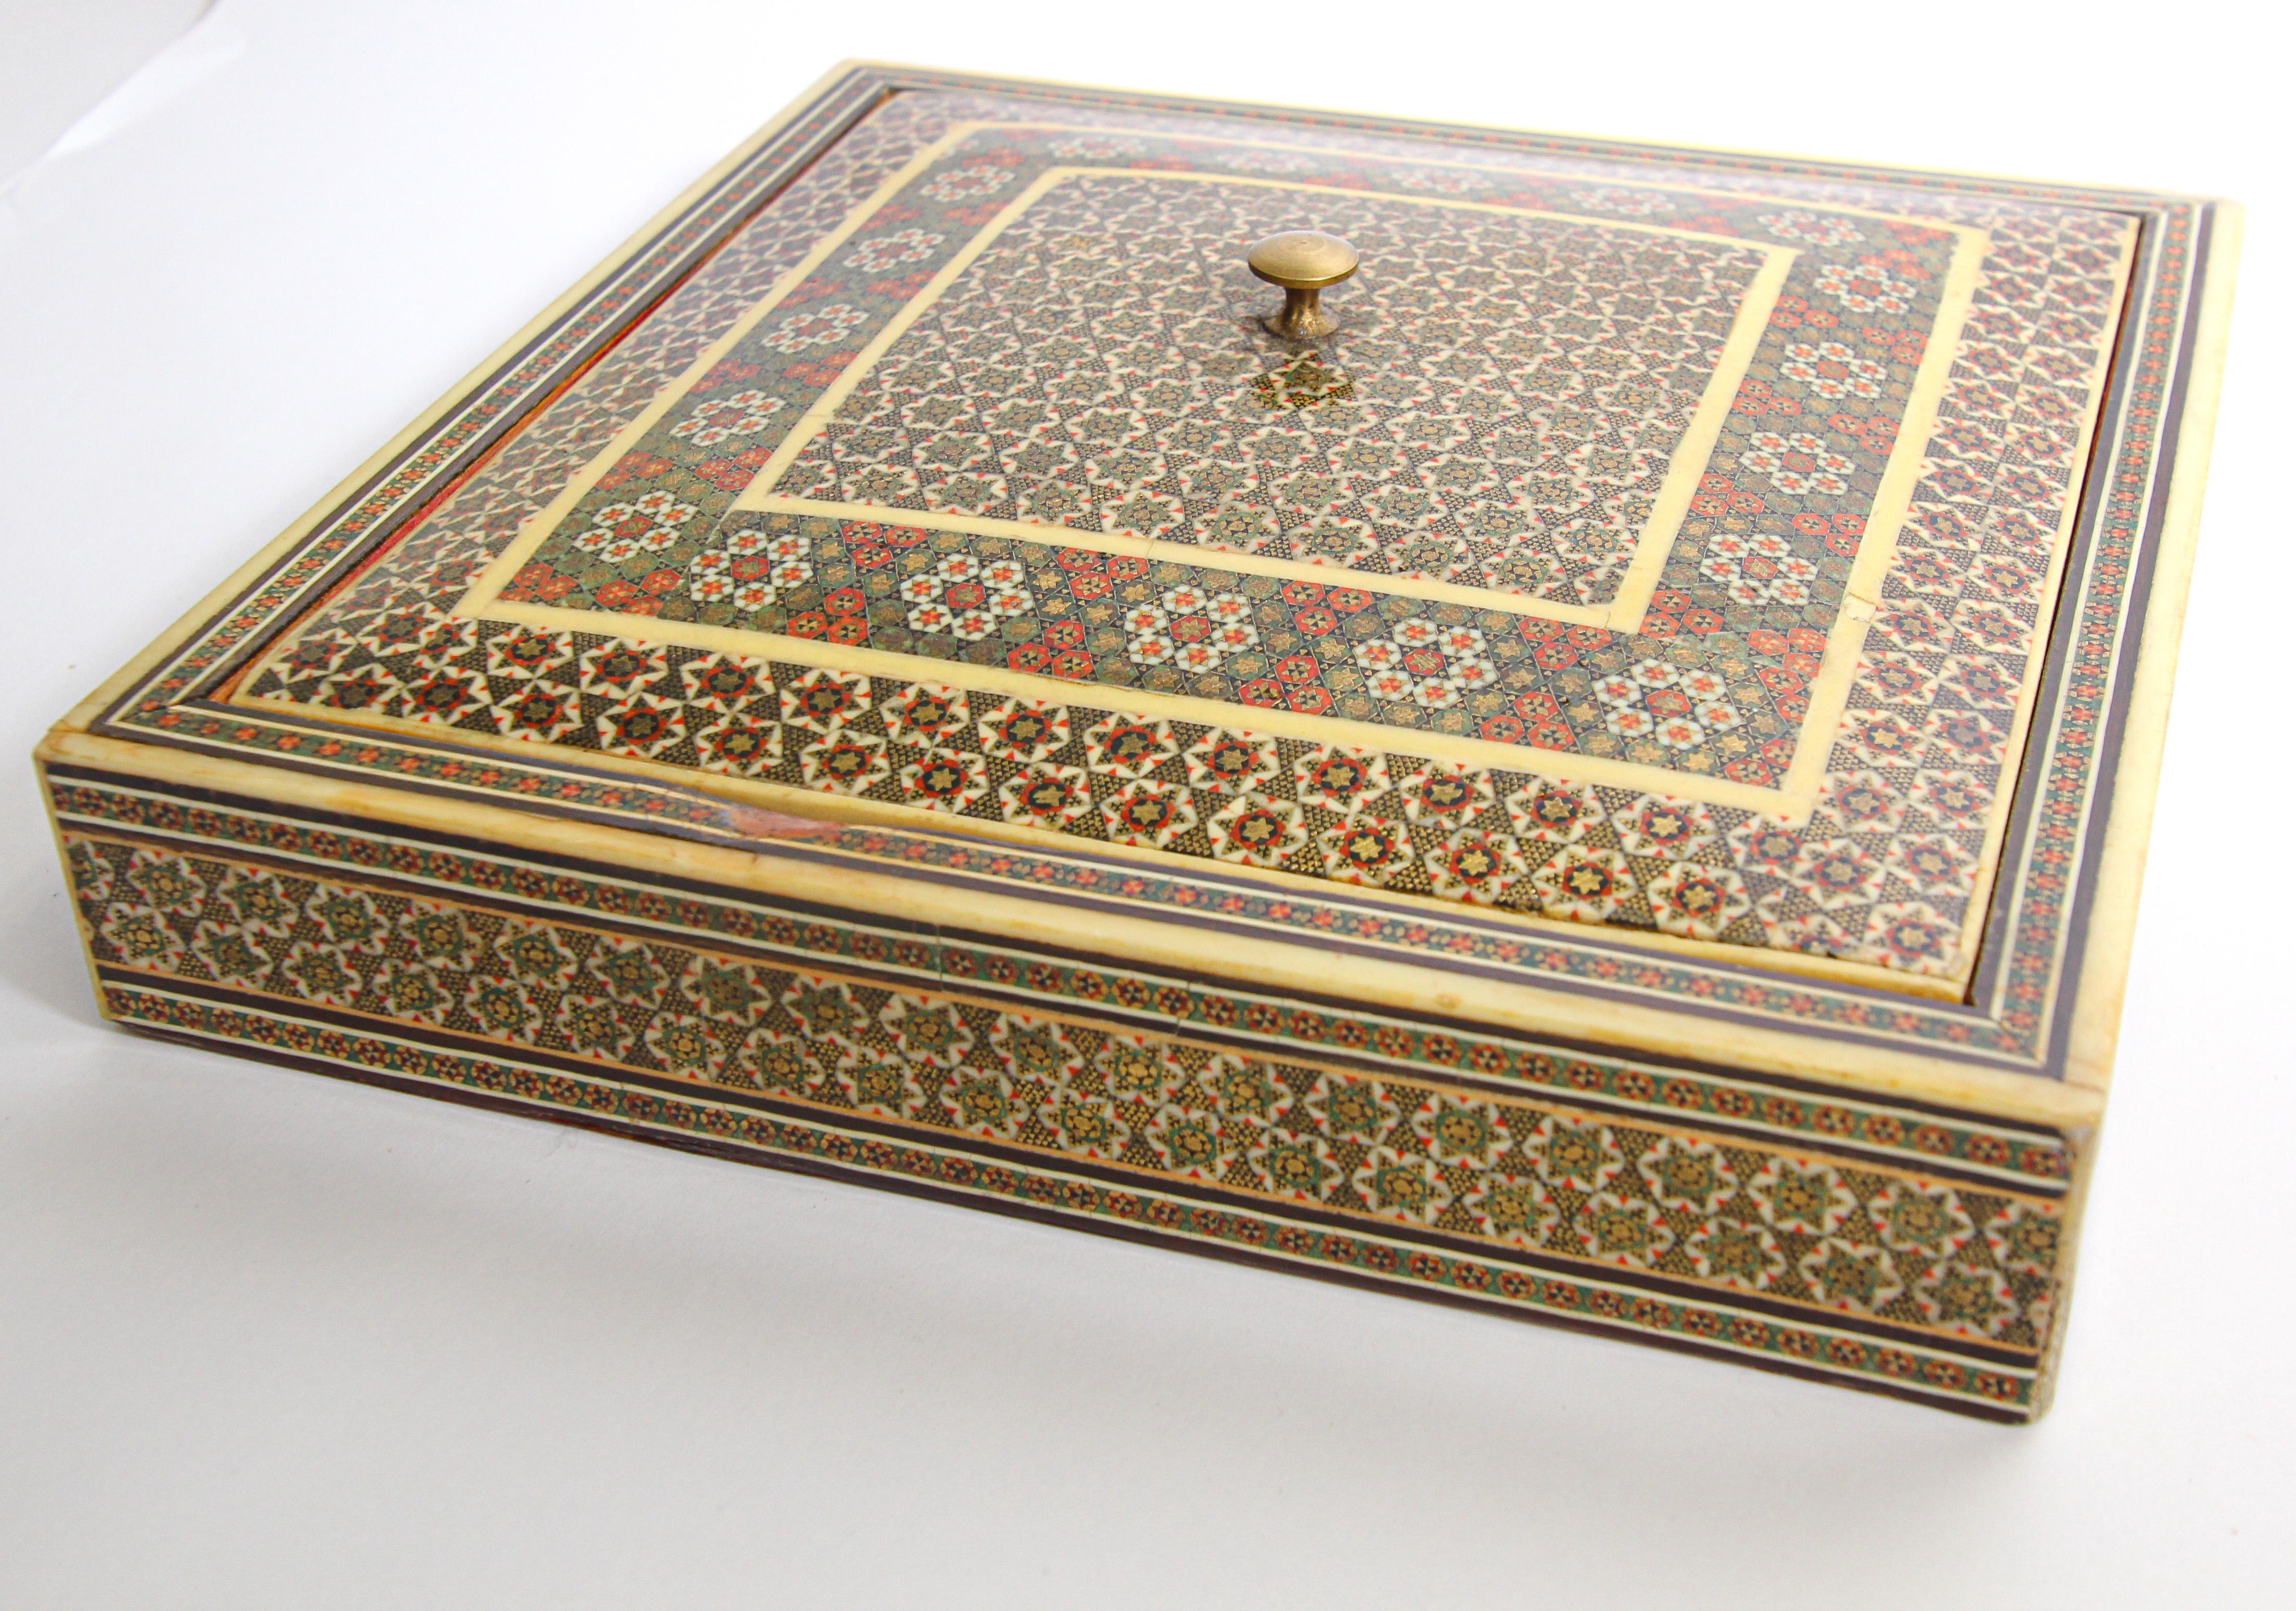 Indo Persian Moorish style micro mosaic inlaid jewelry box with lid.
Intricate inlaid Anglo Indian box with floral and geometric Islamic
Moorish Sadeli design in a square shape form inlay in mosaic marquetry, very fine artwork, lined in red